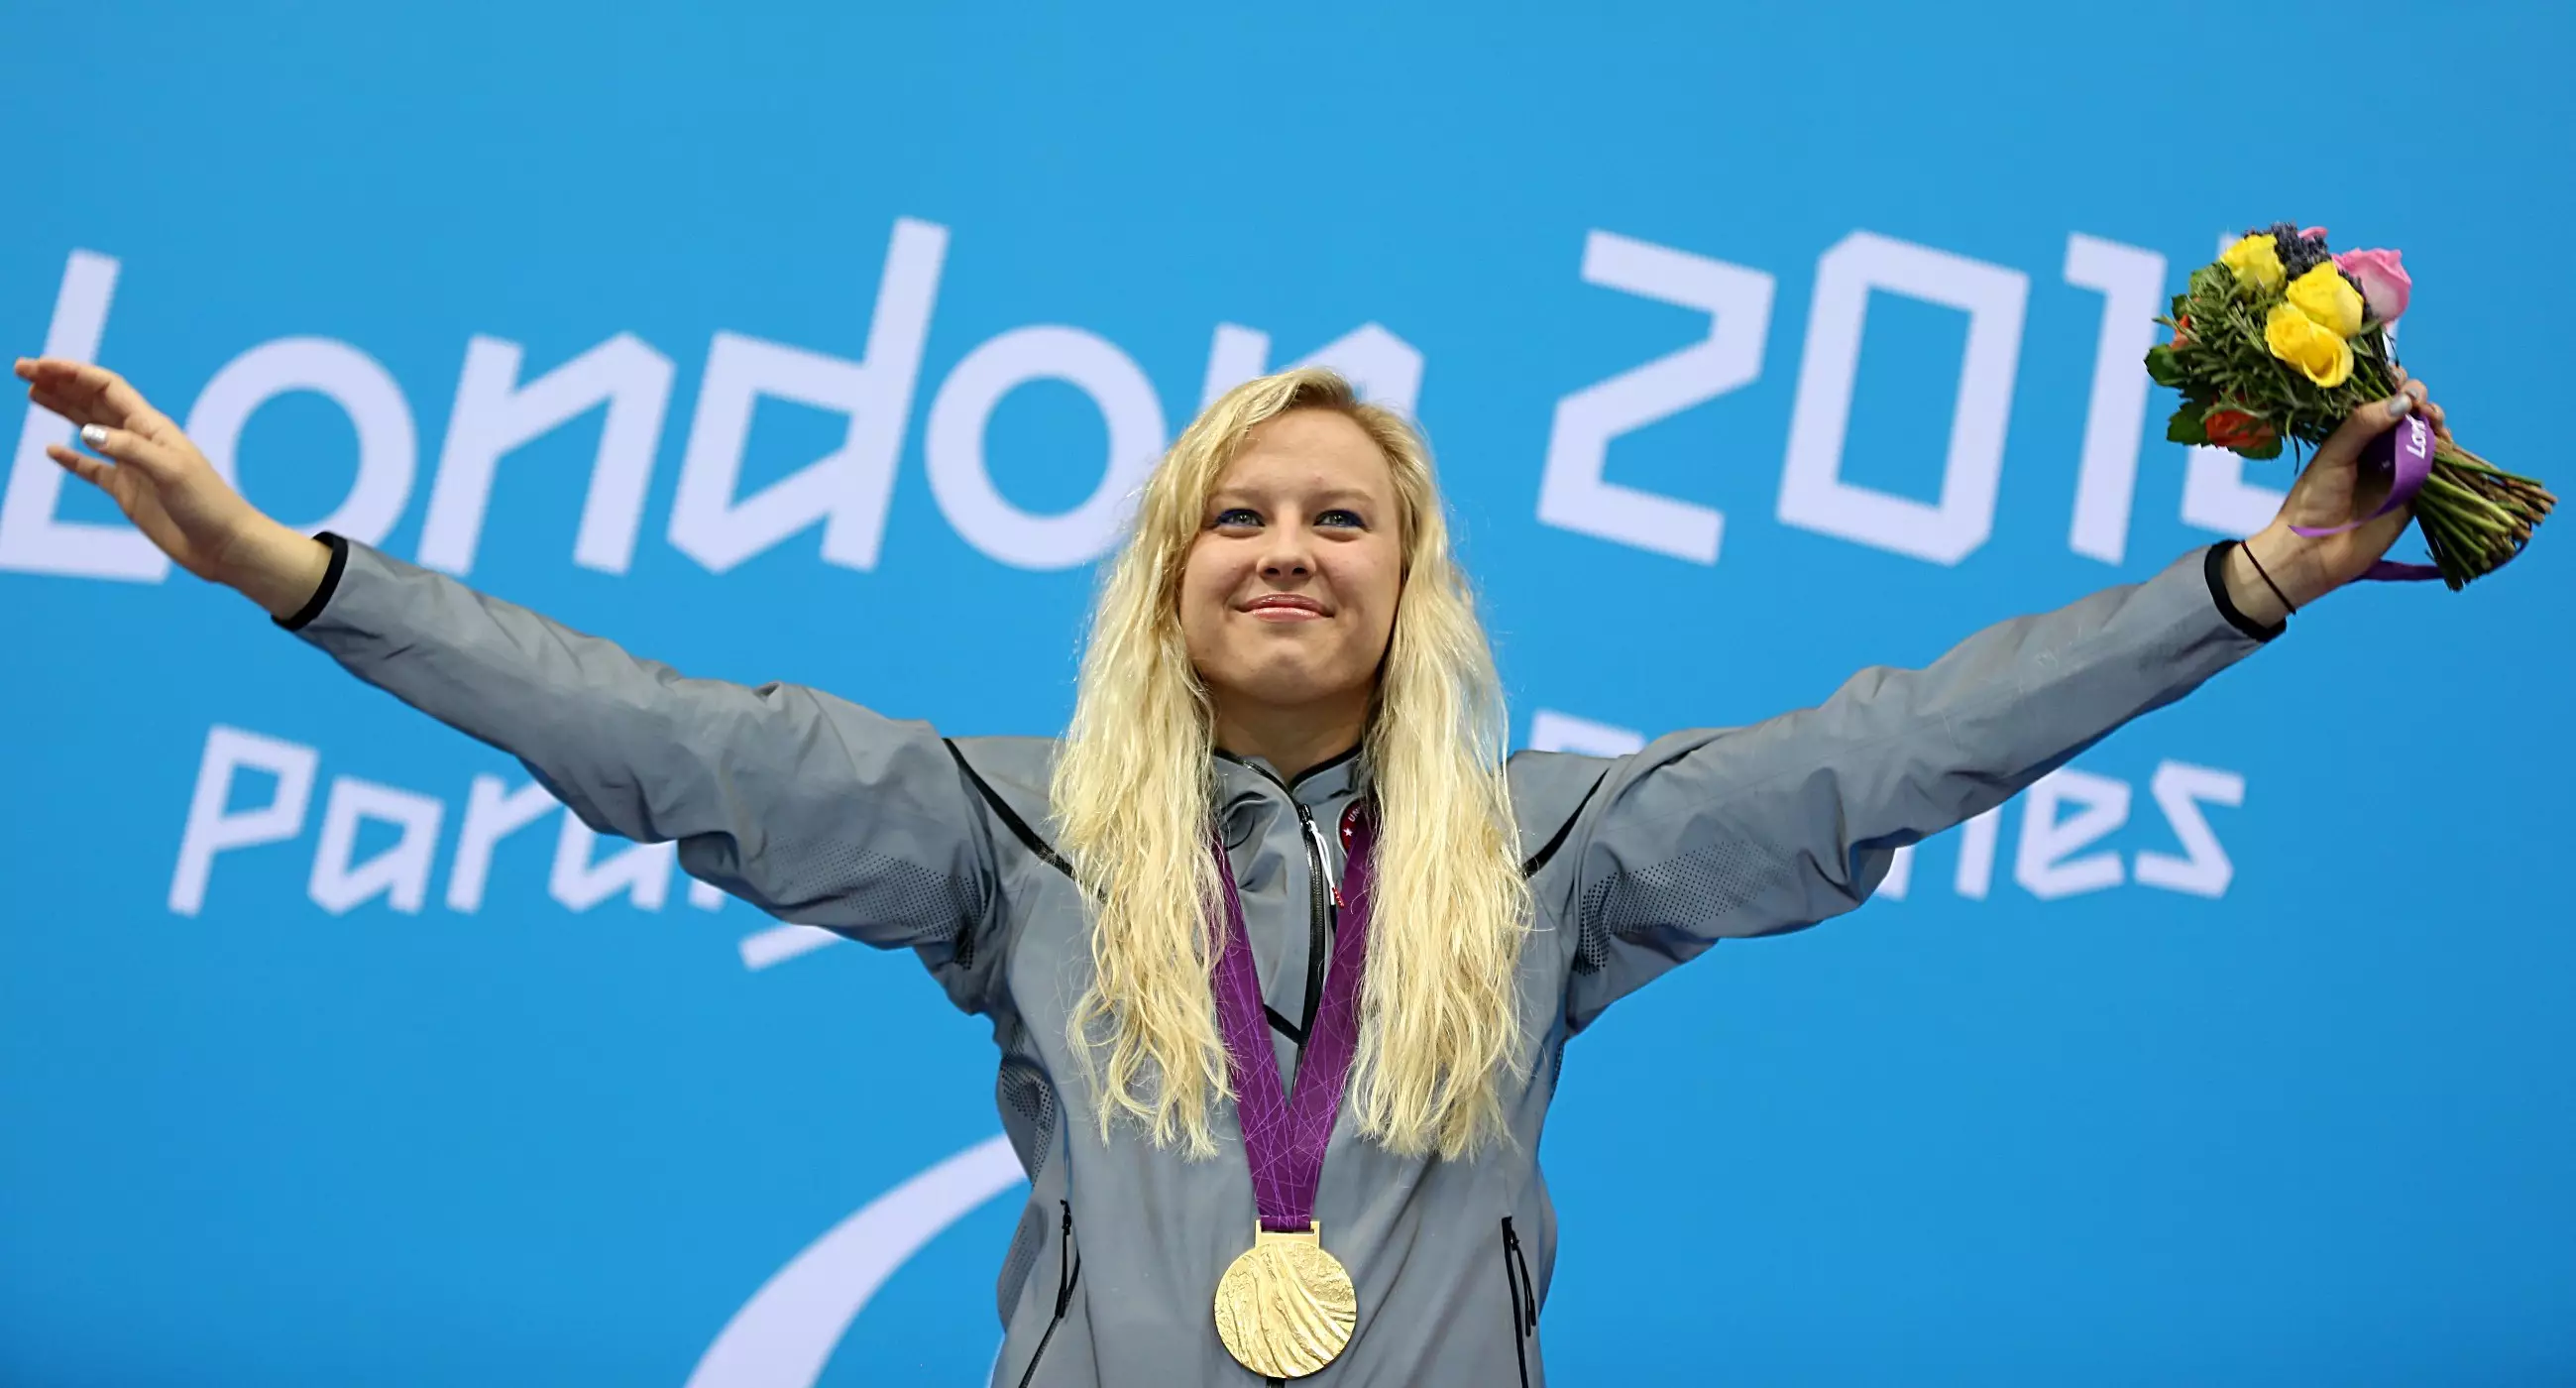 Jessica Long celebrating her Women's 200m Ind. Medley win at the 2012 Paralympics.